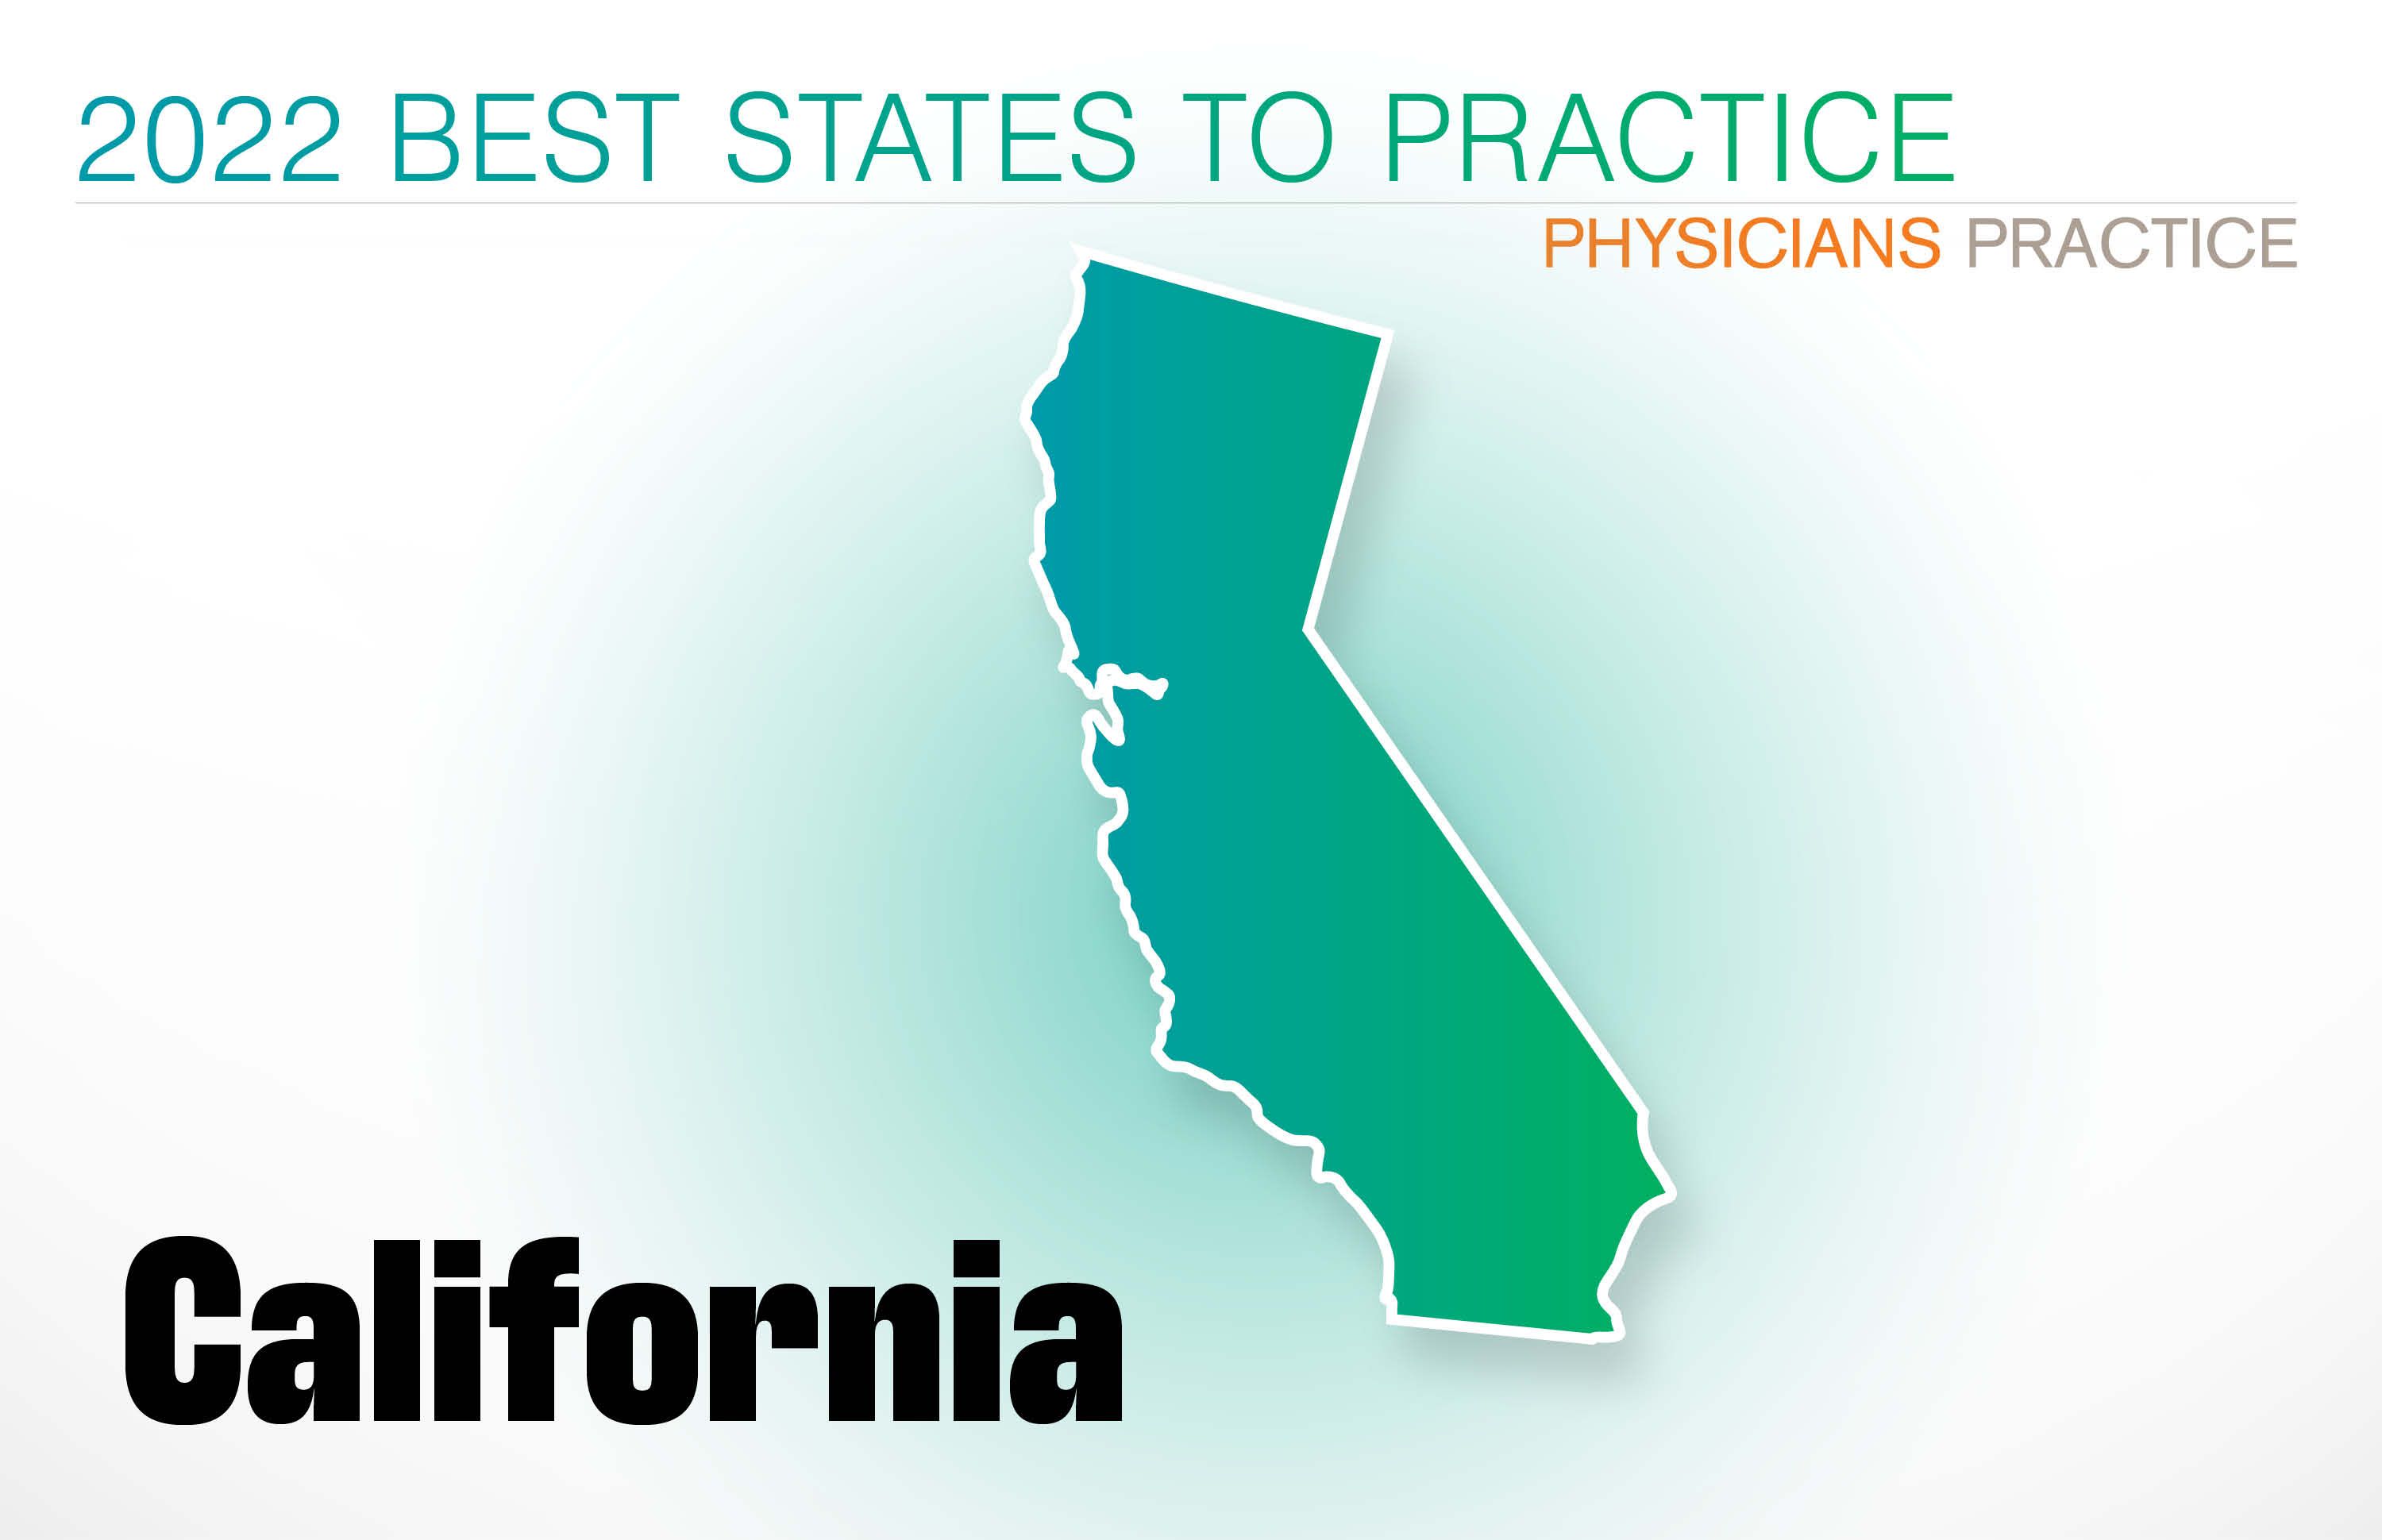 #38 California Rankings: Cost of living: 48 Physician density: 31 Amount of state business taxes collected: 48 Average malpractice insurance rates: 16 Quality of life: 16 GPCI: 23